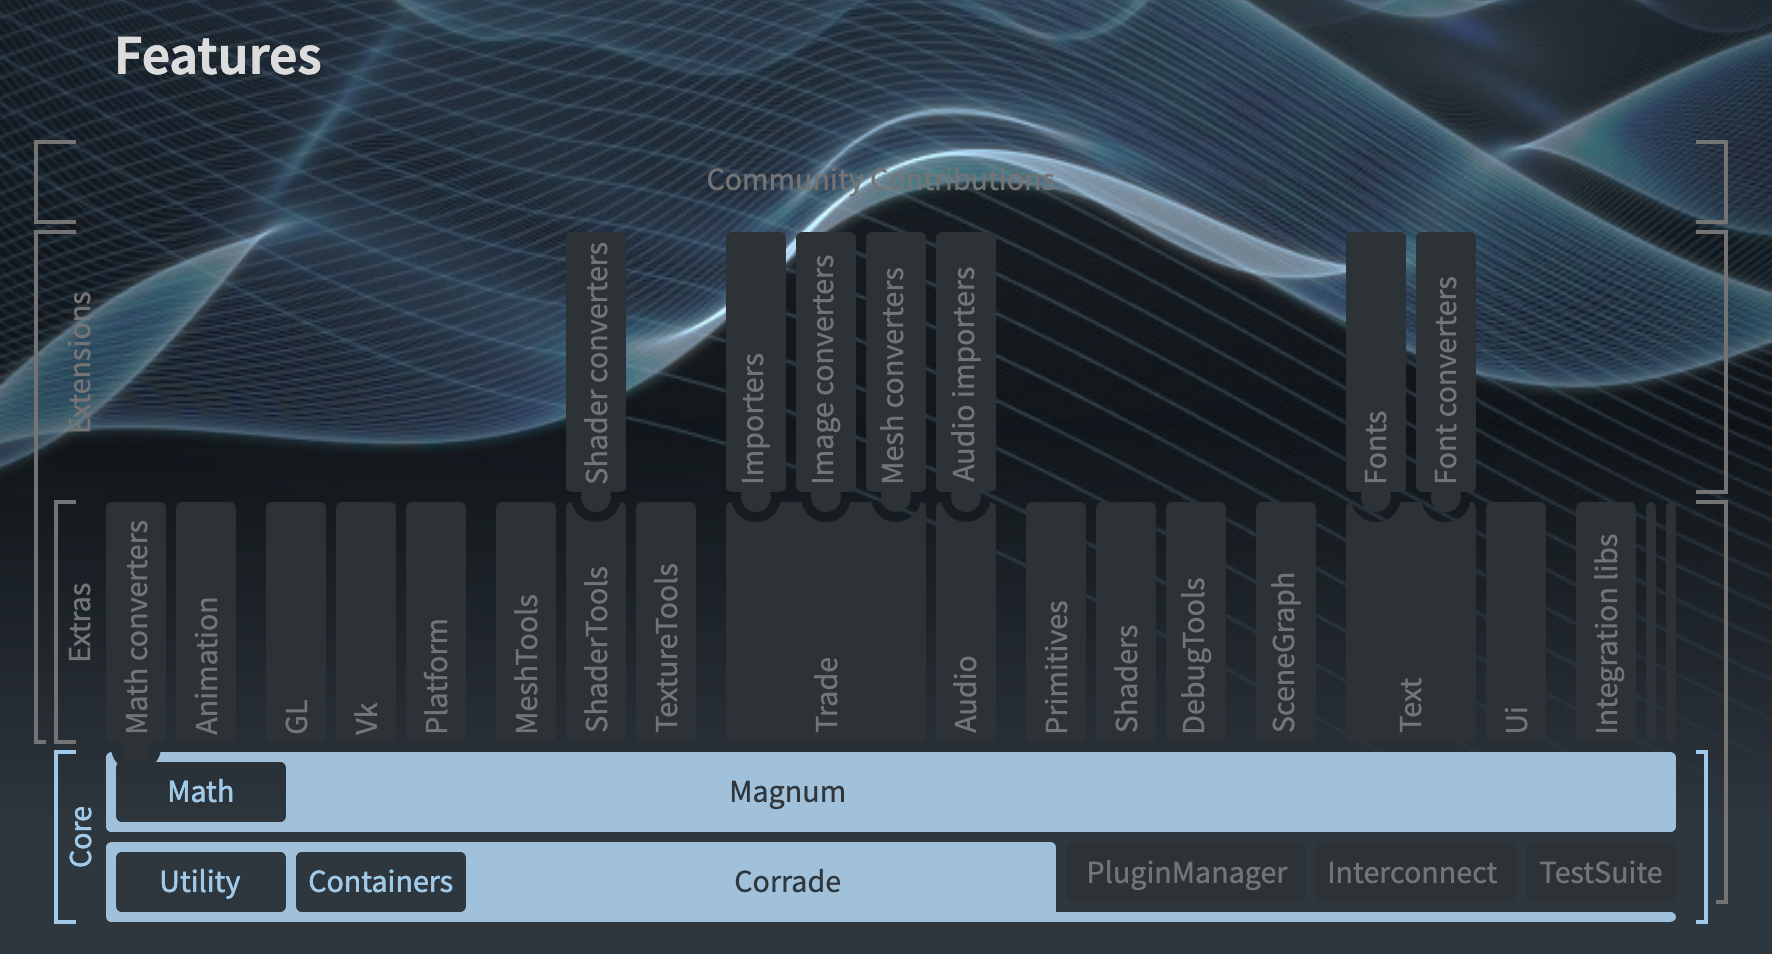 Magnum features chart